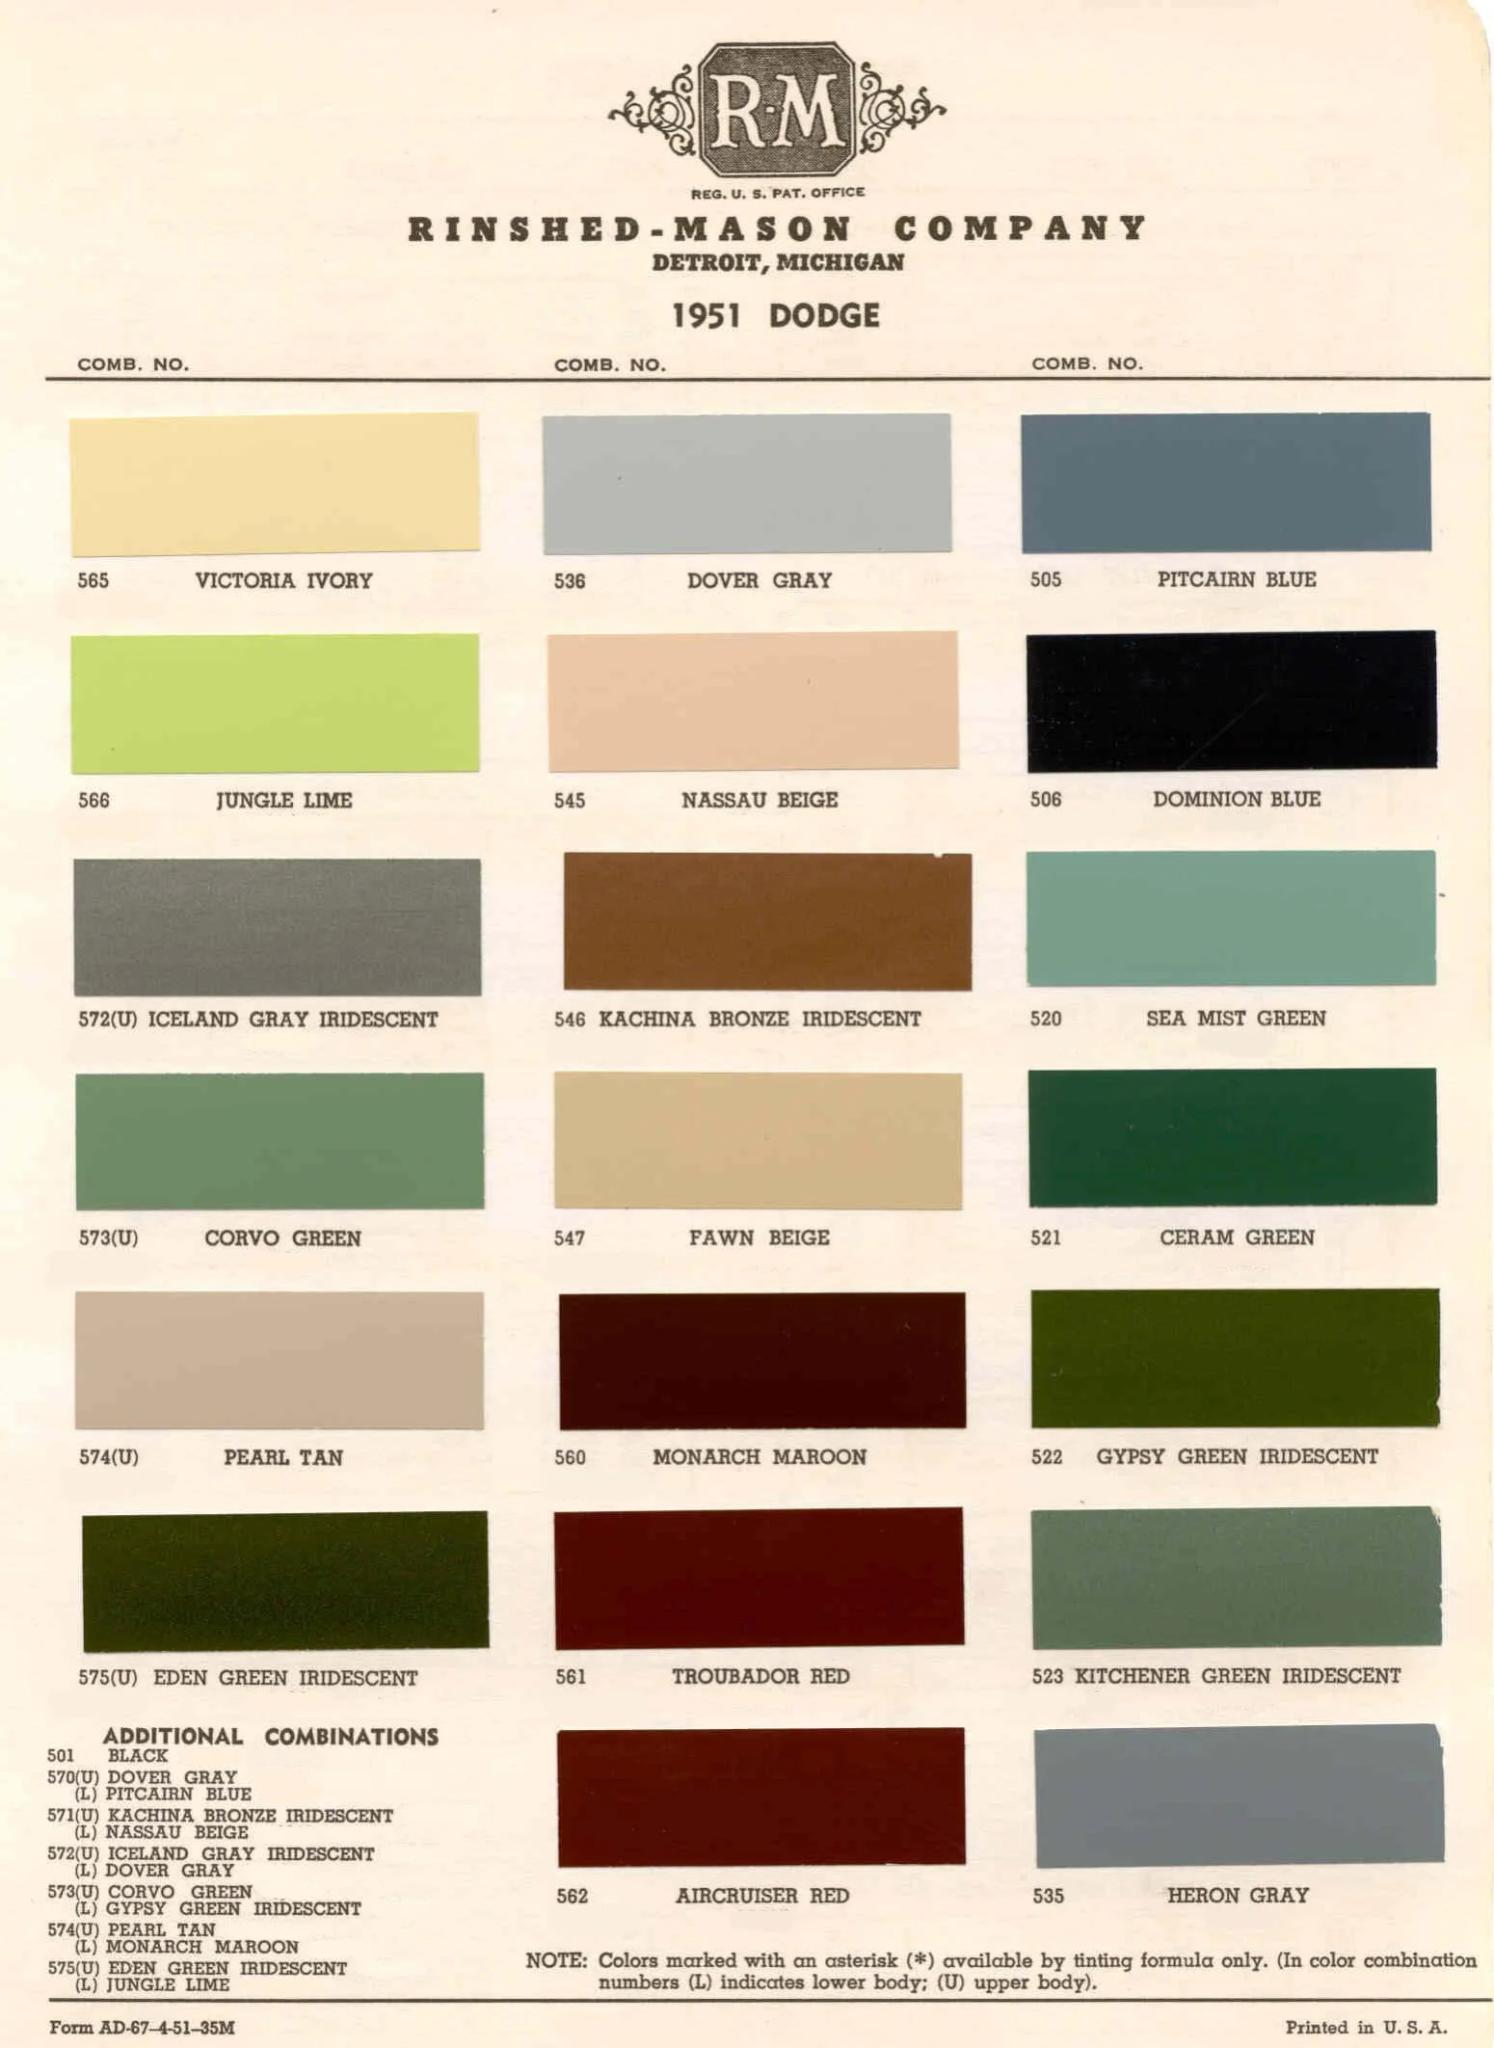 Summary Of Colors used on all Dodge Vehicles in 1951